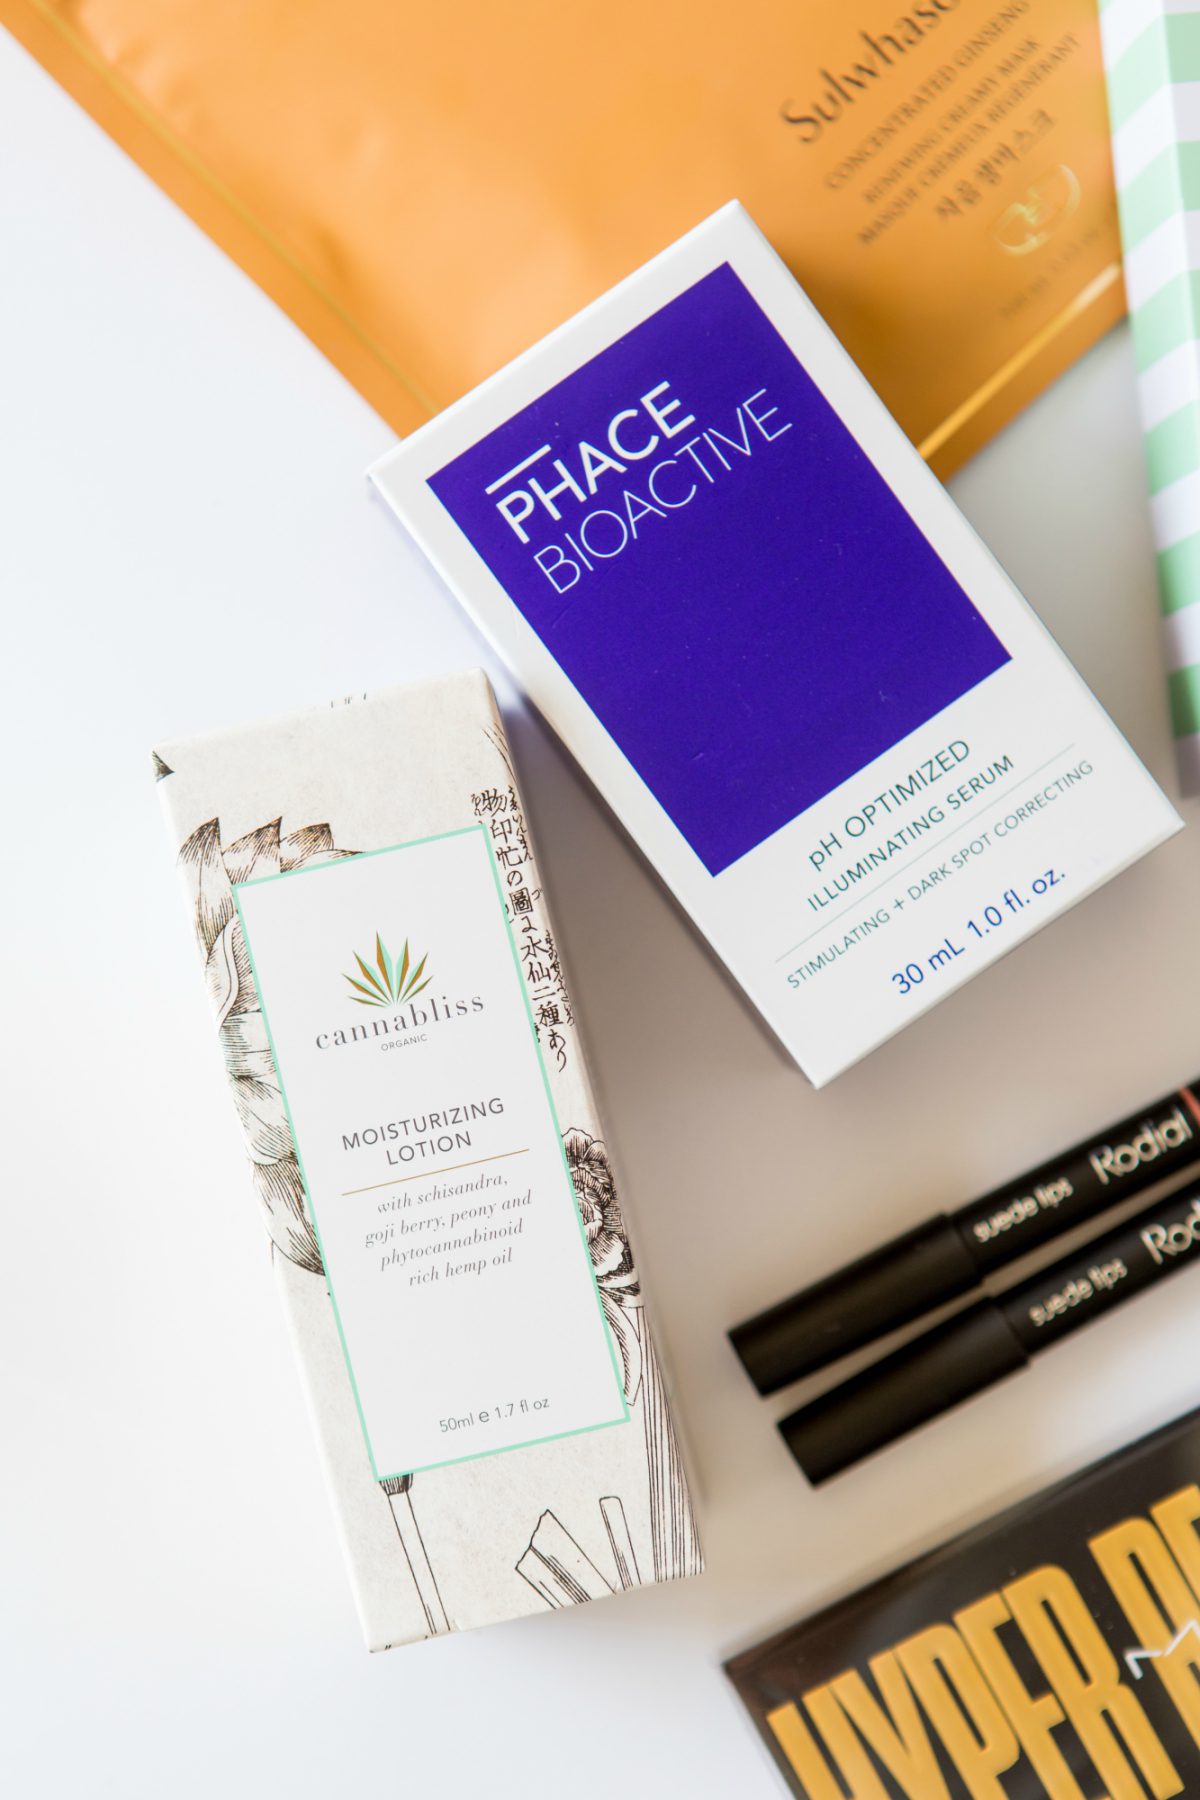 phace bioactive, cannablis, and other products for March Favorites Giveaway